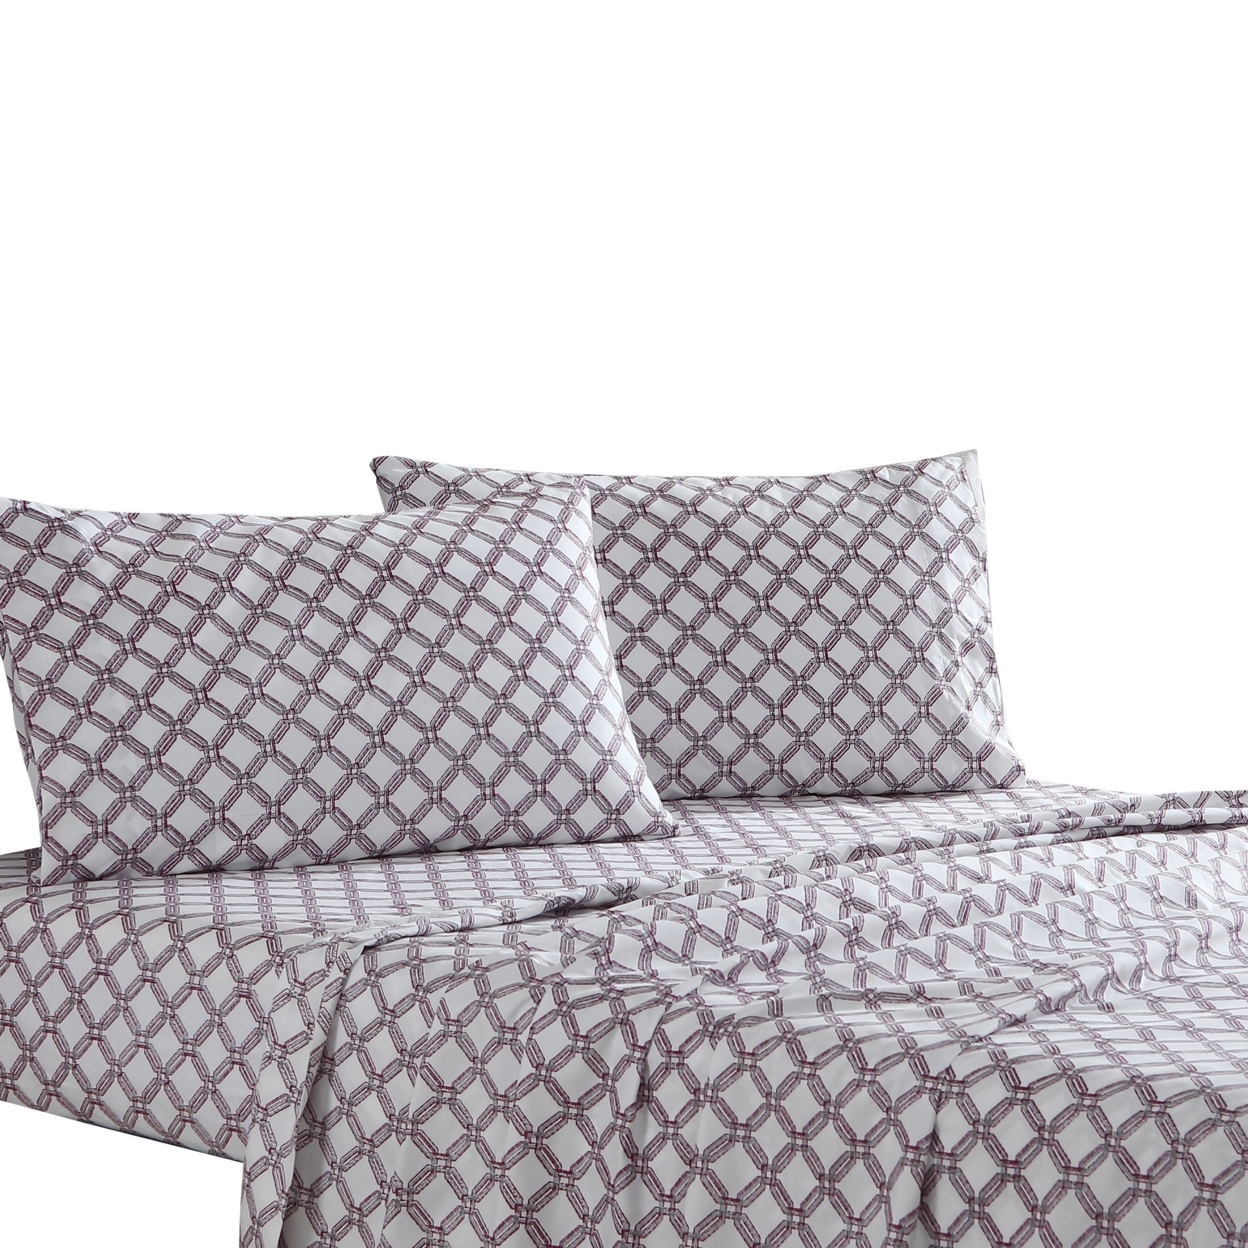 Veria 4 Piece Queen Bedsheet Set With Celtic Knot Print The Urban Port, White And Gray- Saltoro Sherpi